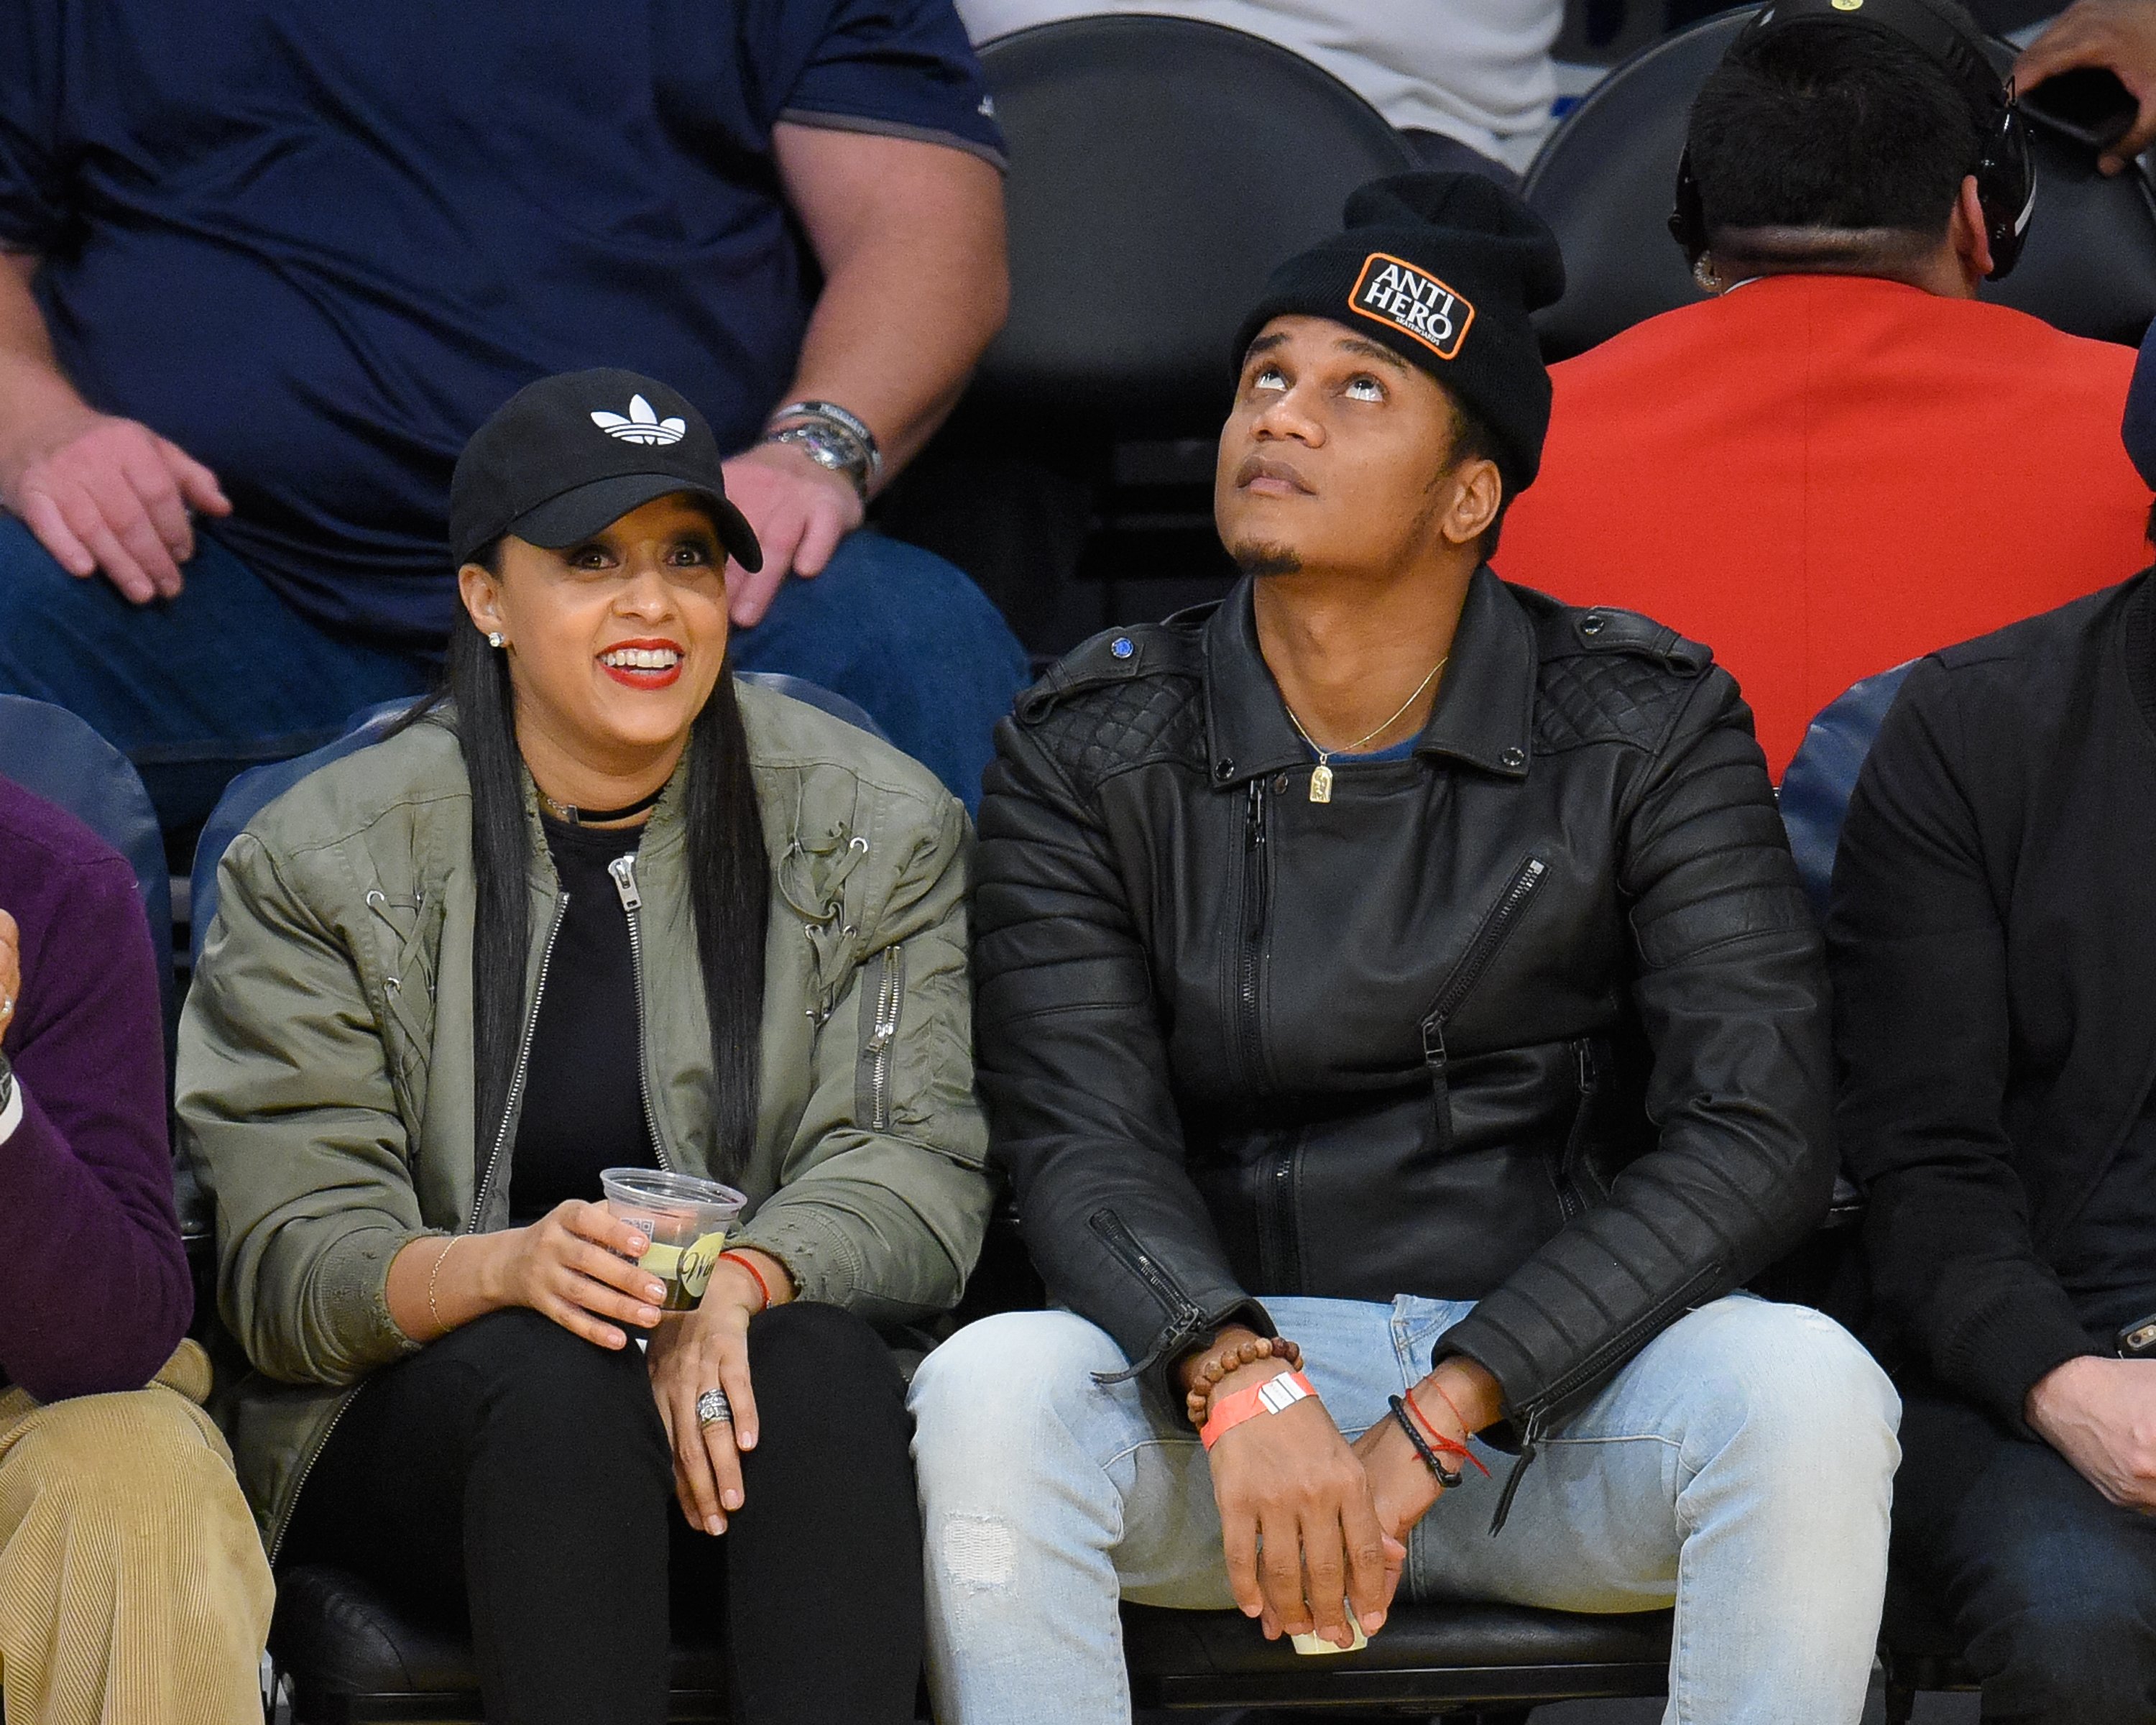 Tia Mowry and Cory Hardrict at a basketball game at Staples Center on January 17, 2017, in Los Angeles, California | Source: Getty Images